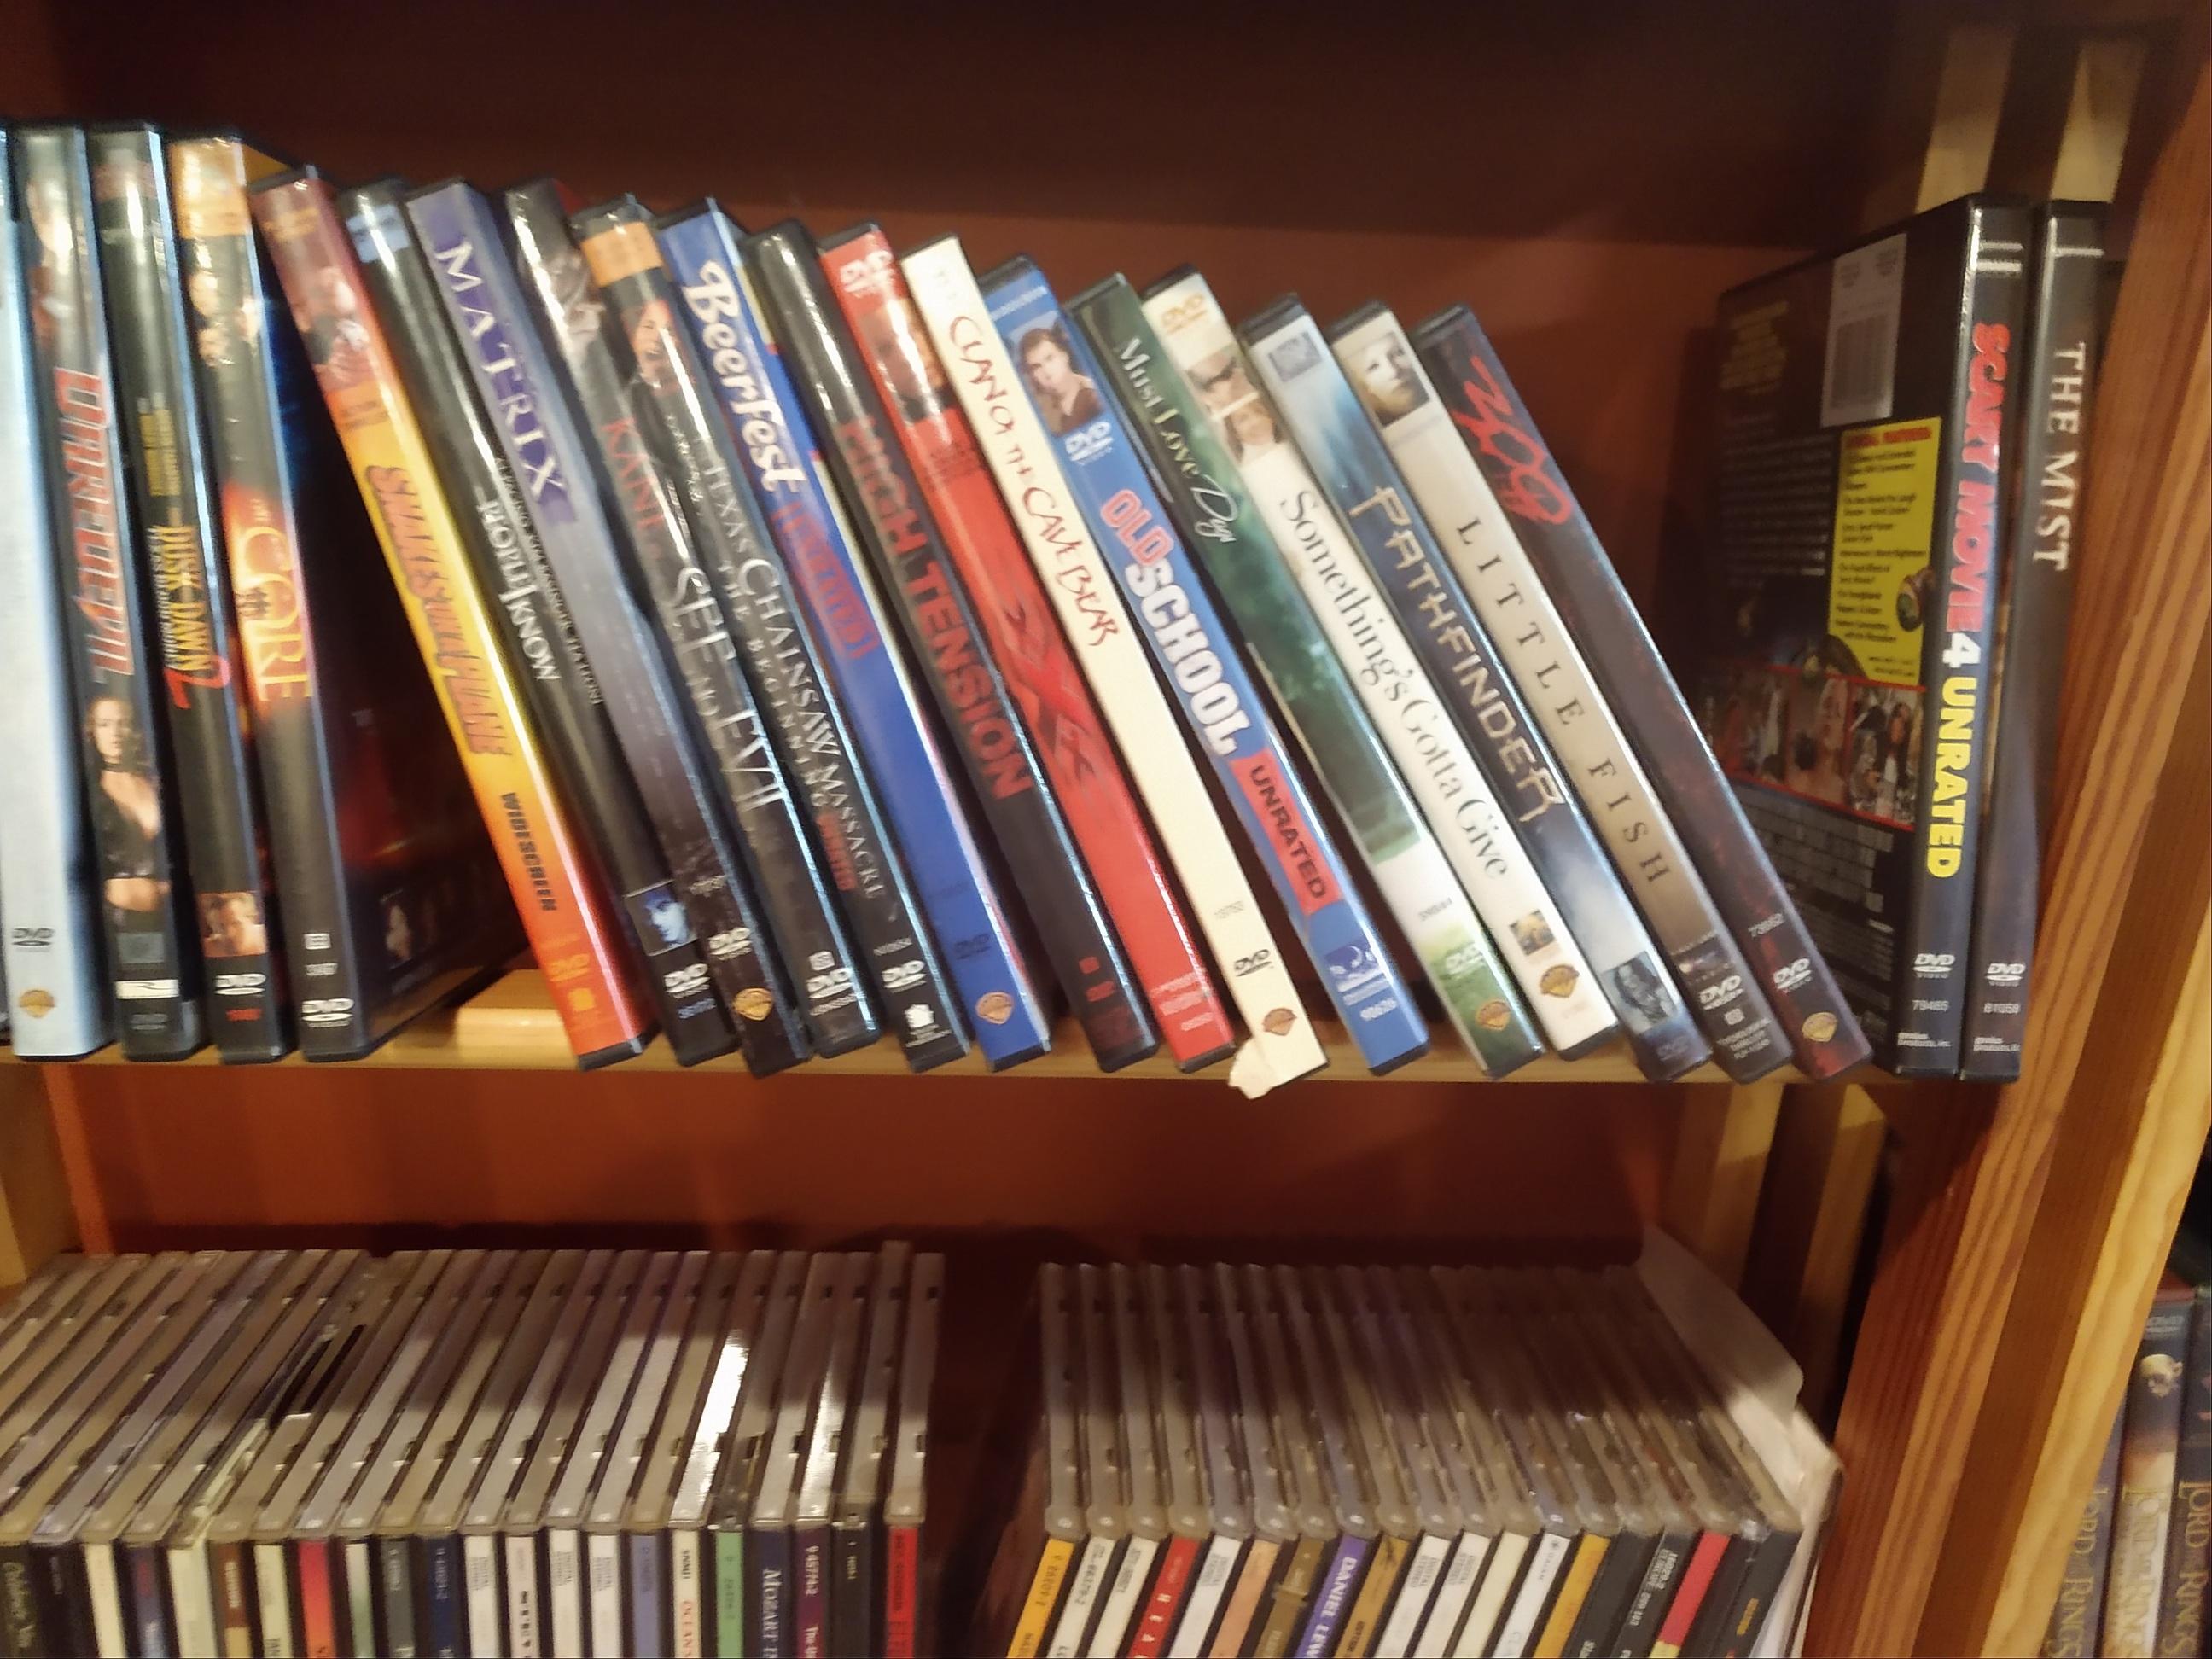 Huge Collection of DVD's, Playstation 2 Games, CD's, Books, Phones  and Shelving